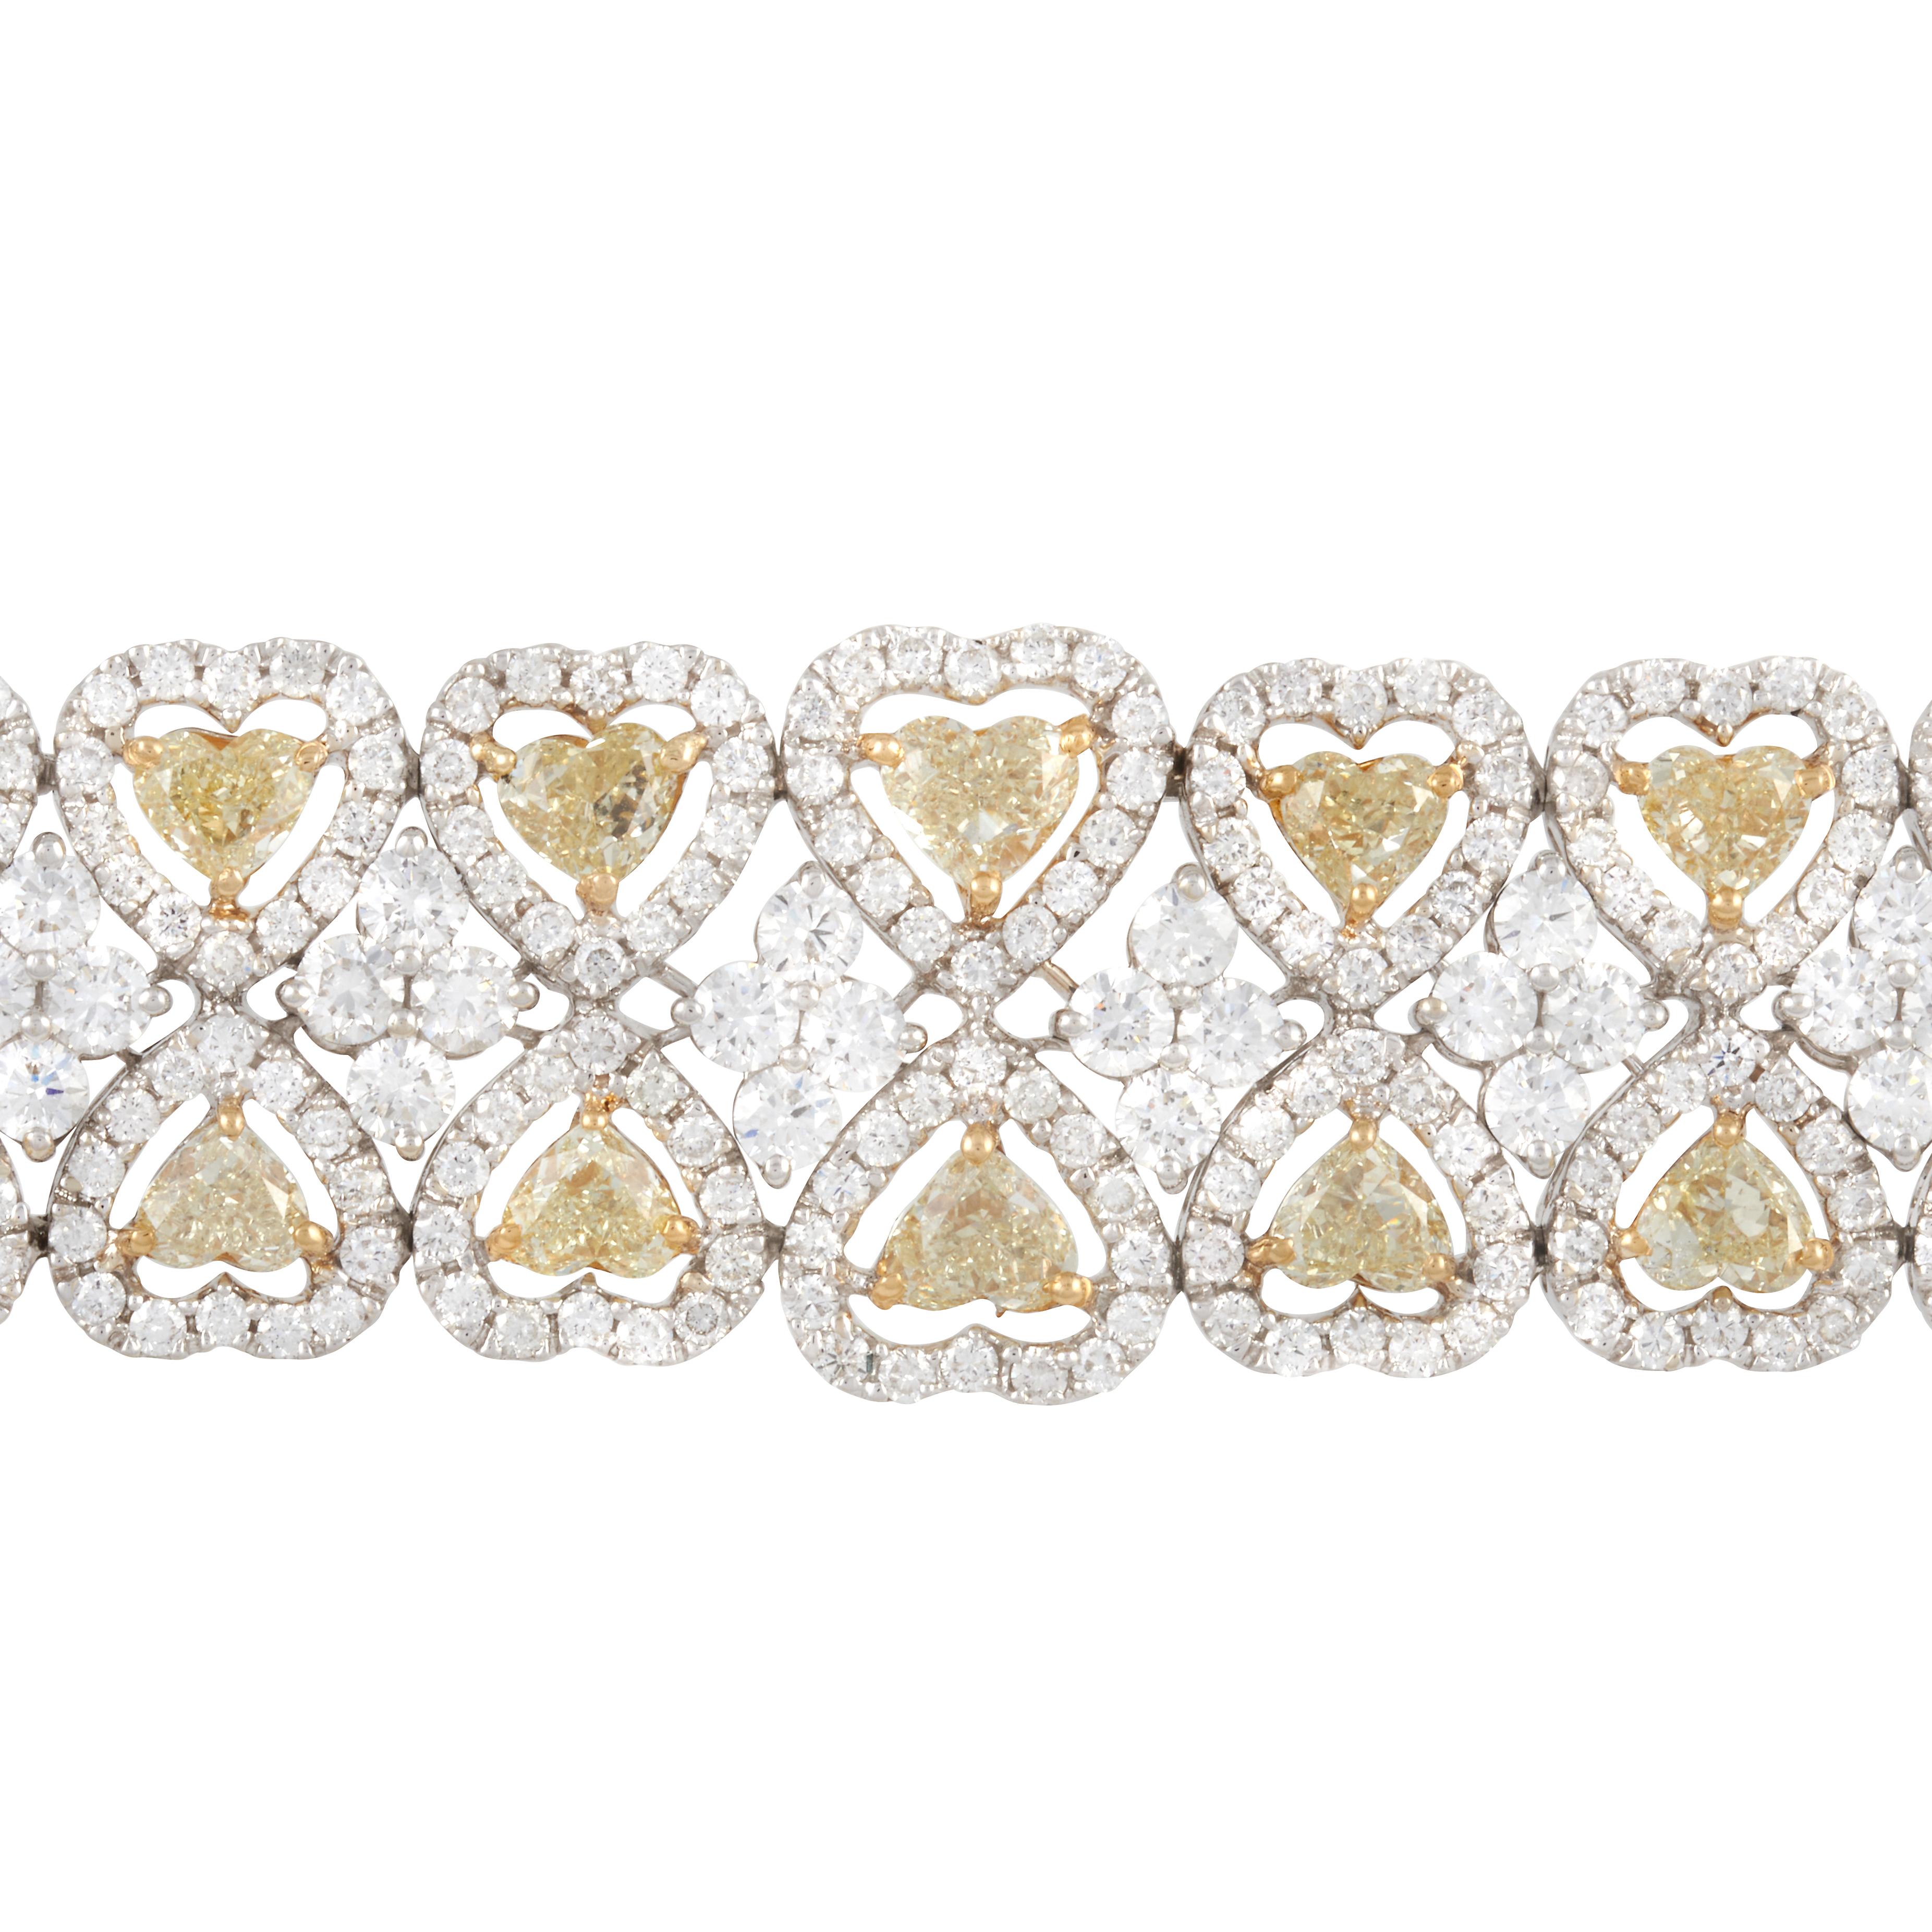 A 18-karat white and yellow gold diamond bracelet with two rows of heart shape diamonds with white diamond halos. There are 38 Fancy Yellow heart diamonds that weight about 13.50 carats with a VS clarity. There are 612 round white diamonds that